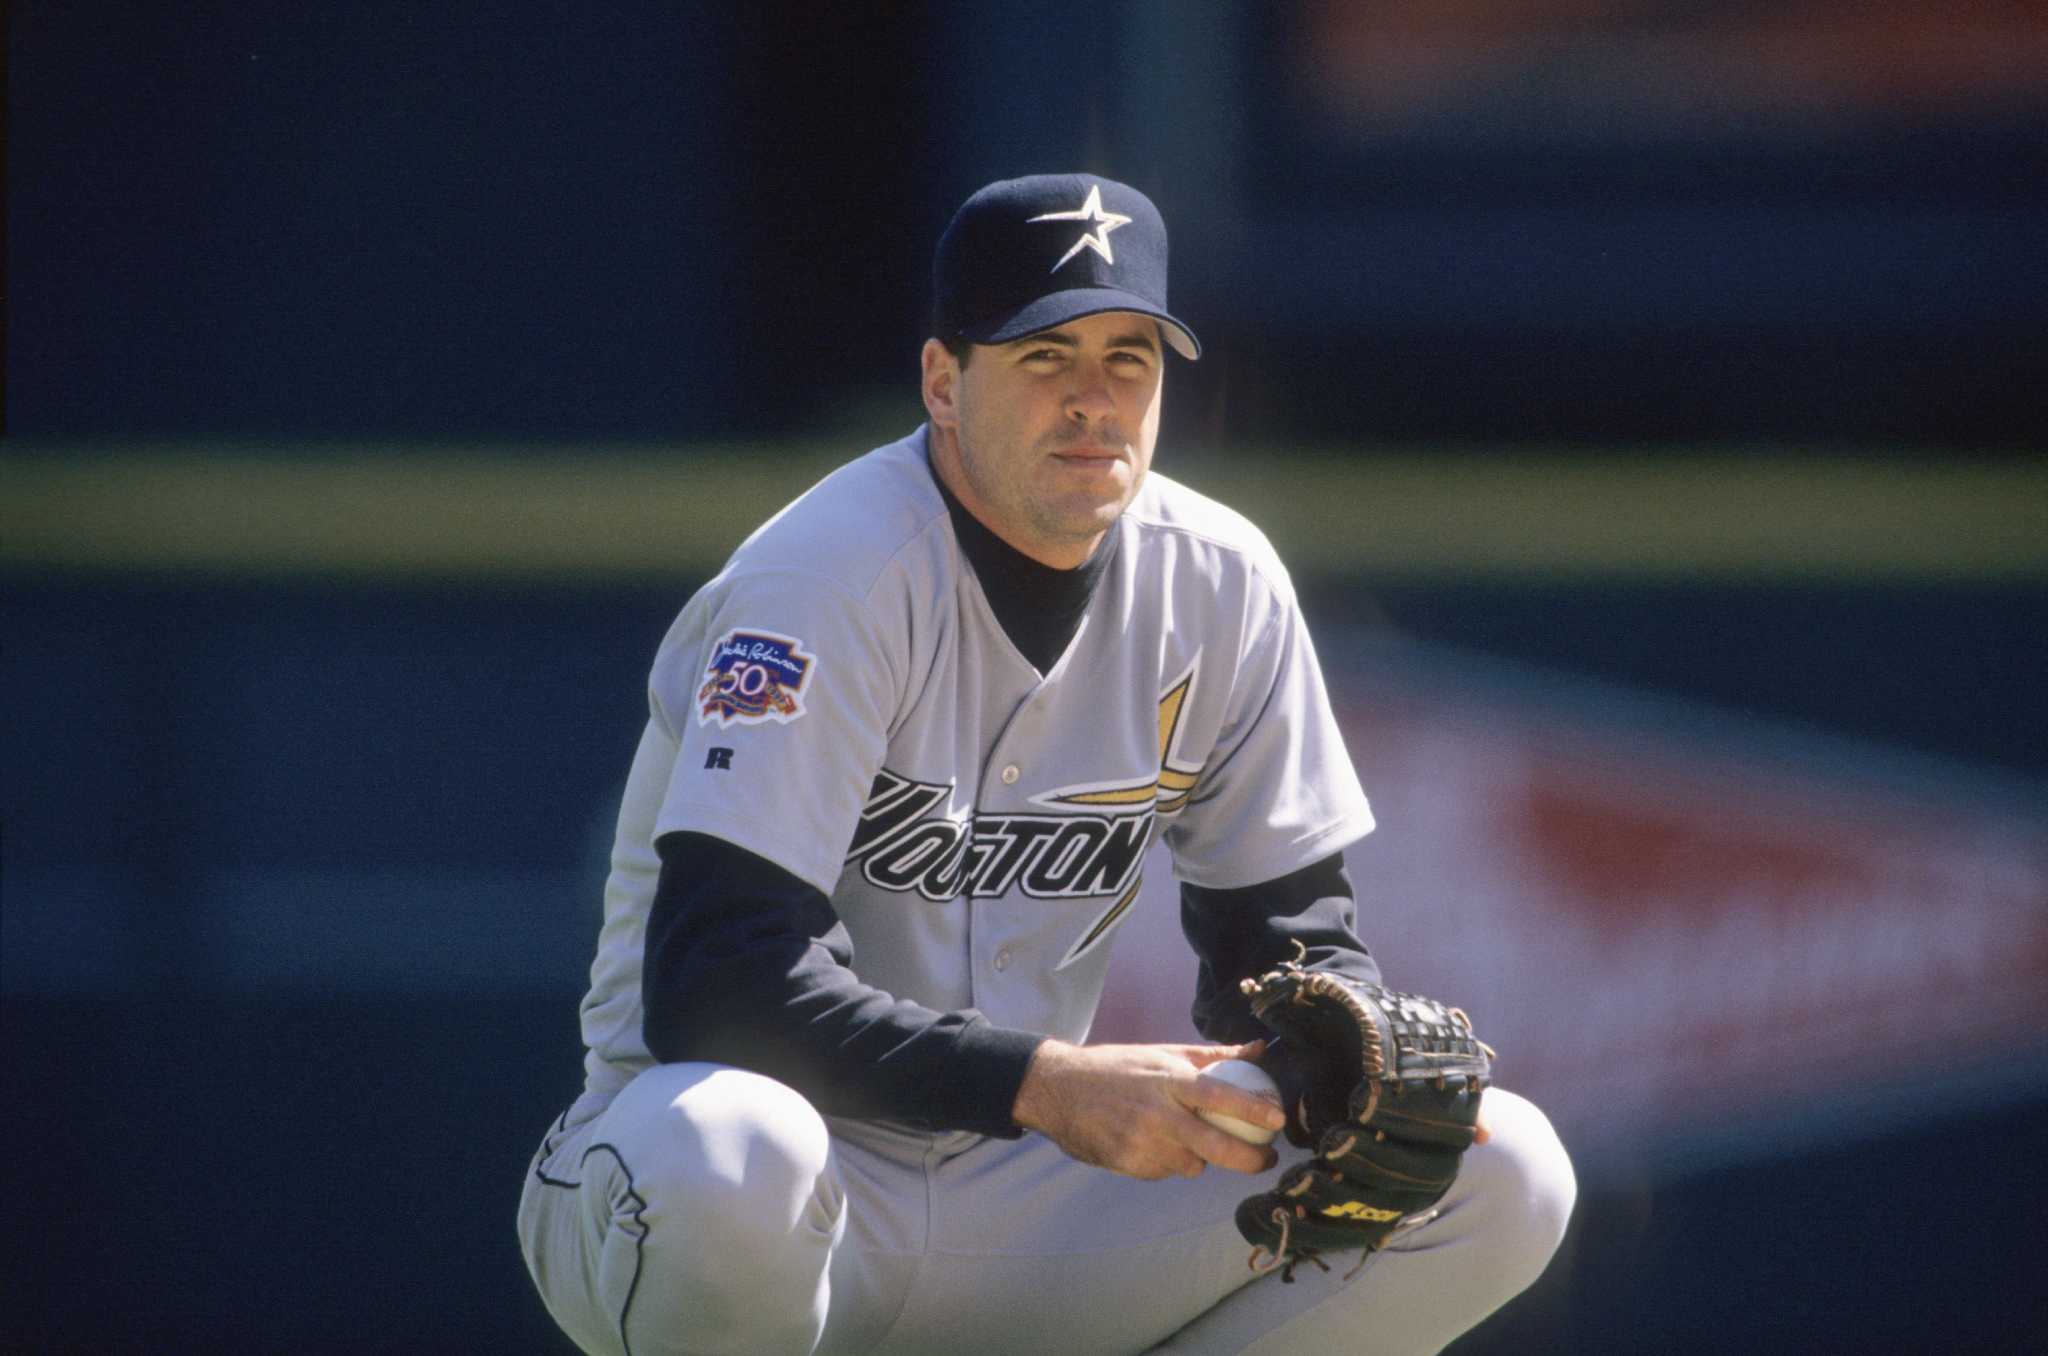 Darryl Kile, former Astros pitcher and fan favorite, died 15 years ago